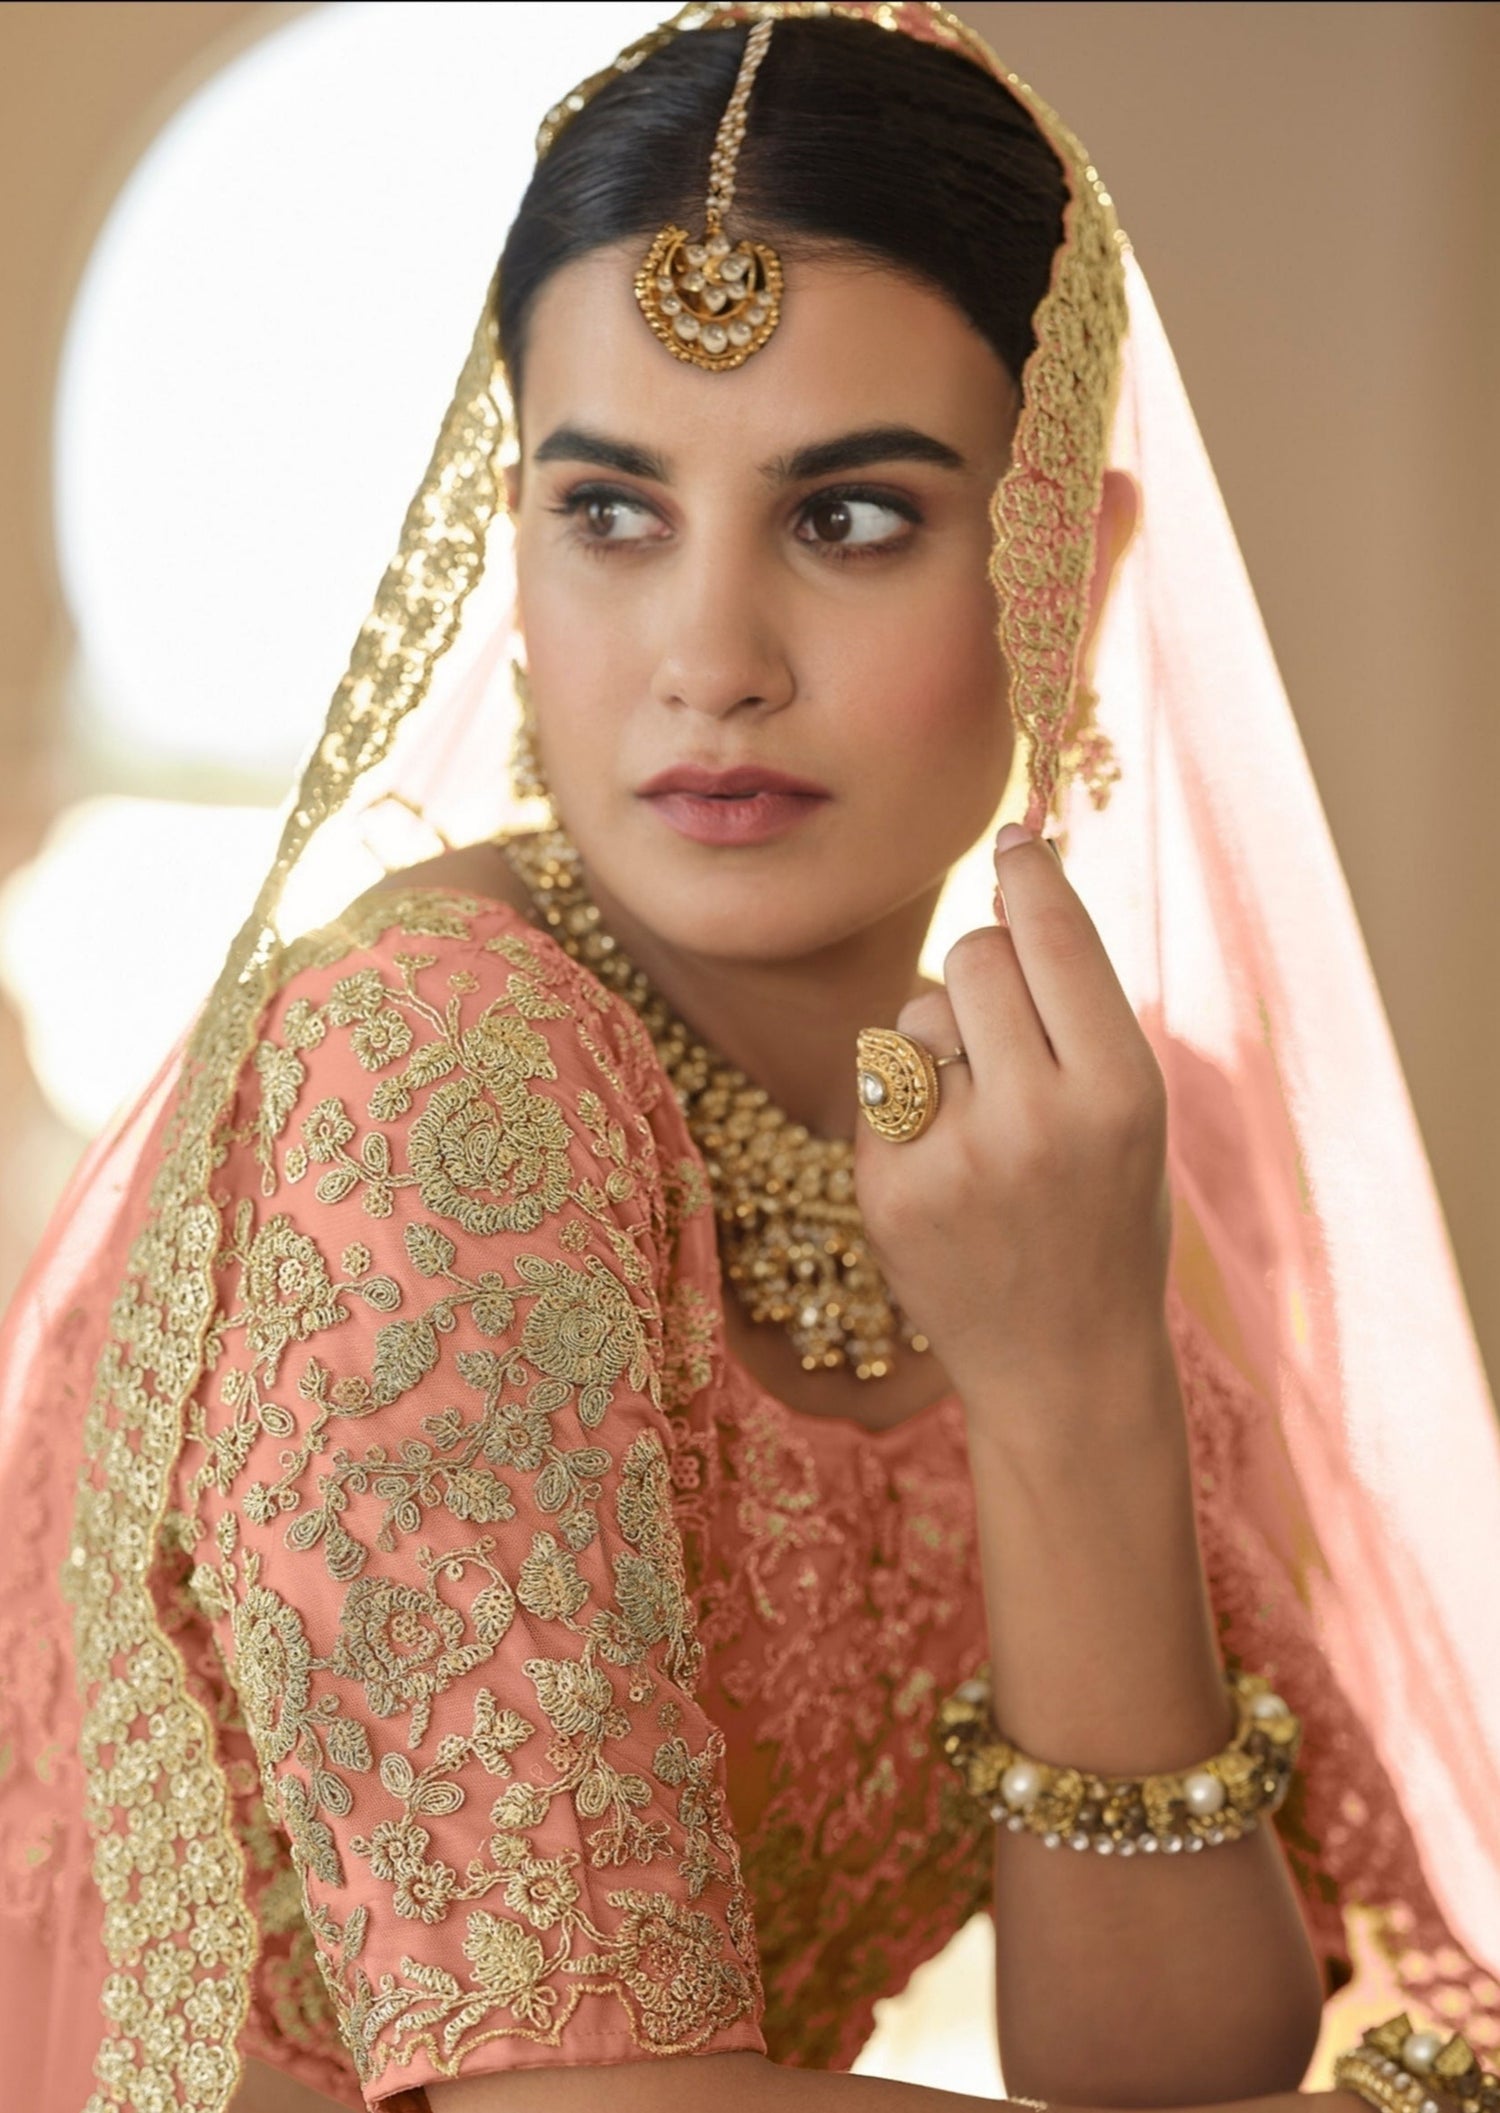 Sabyasachi Bride Stuns In A Blush Pink 'Lehenga' With Heavy 'Polki'  Jewellery For Her Wedding